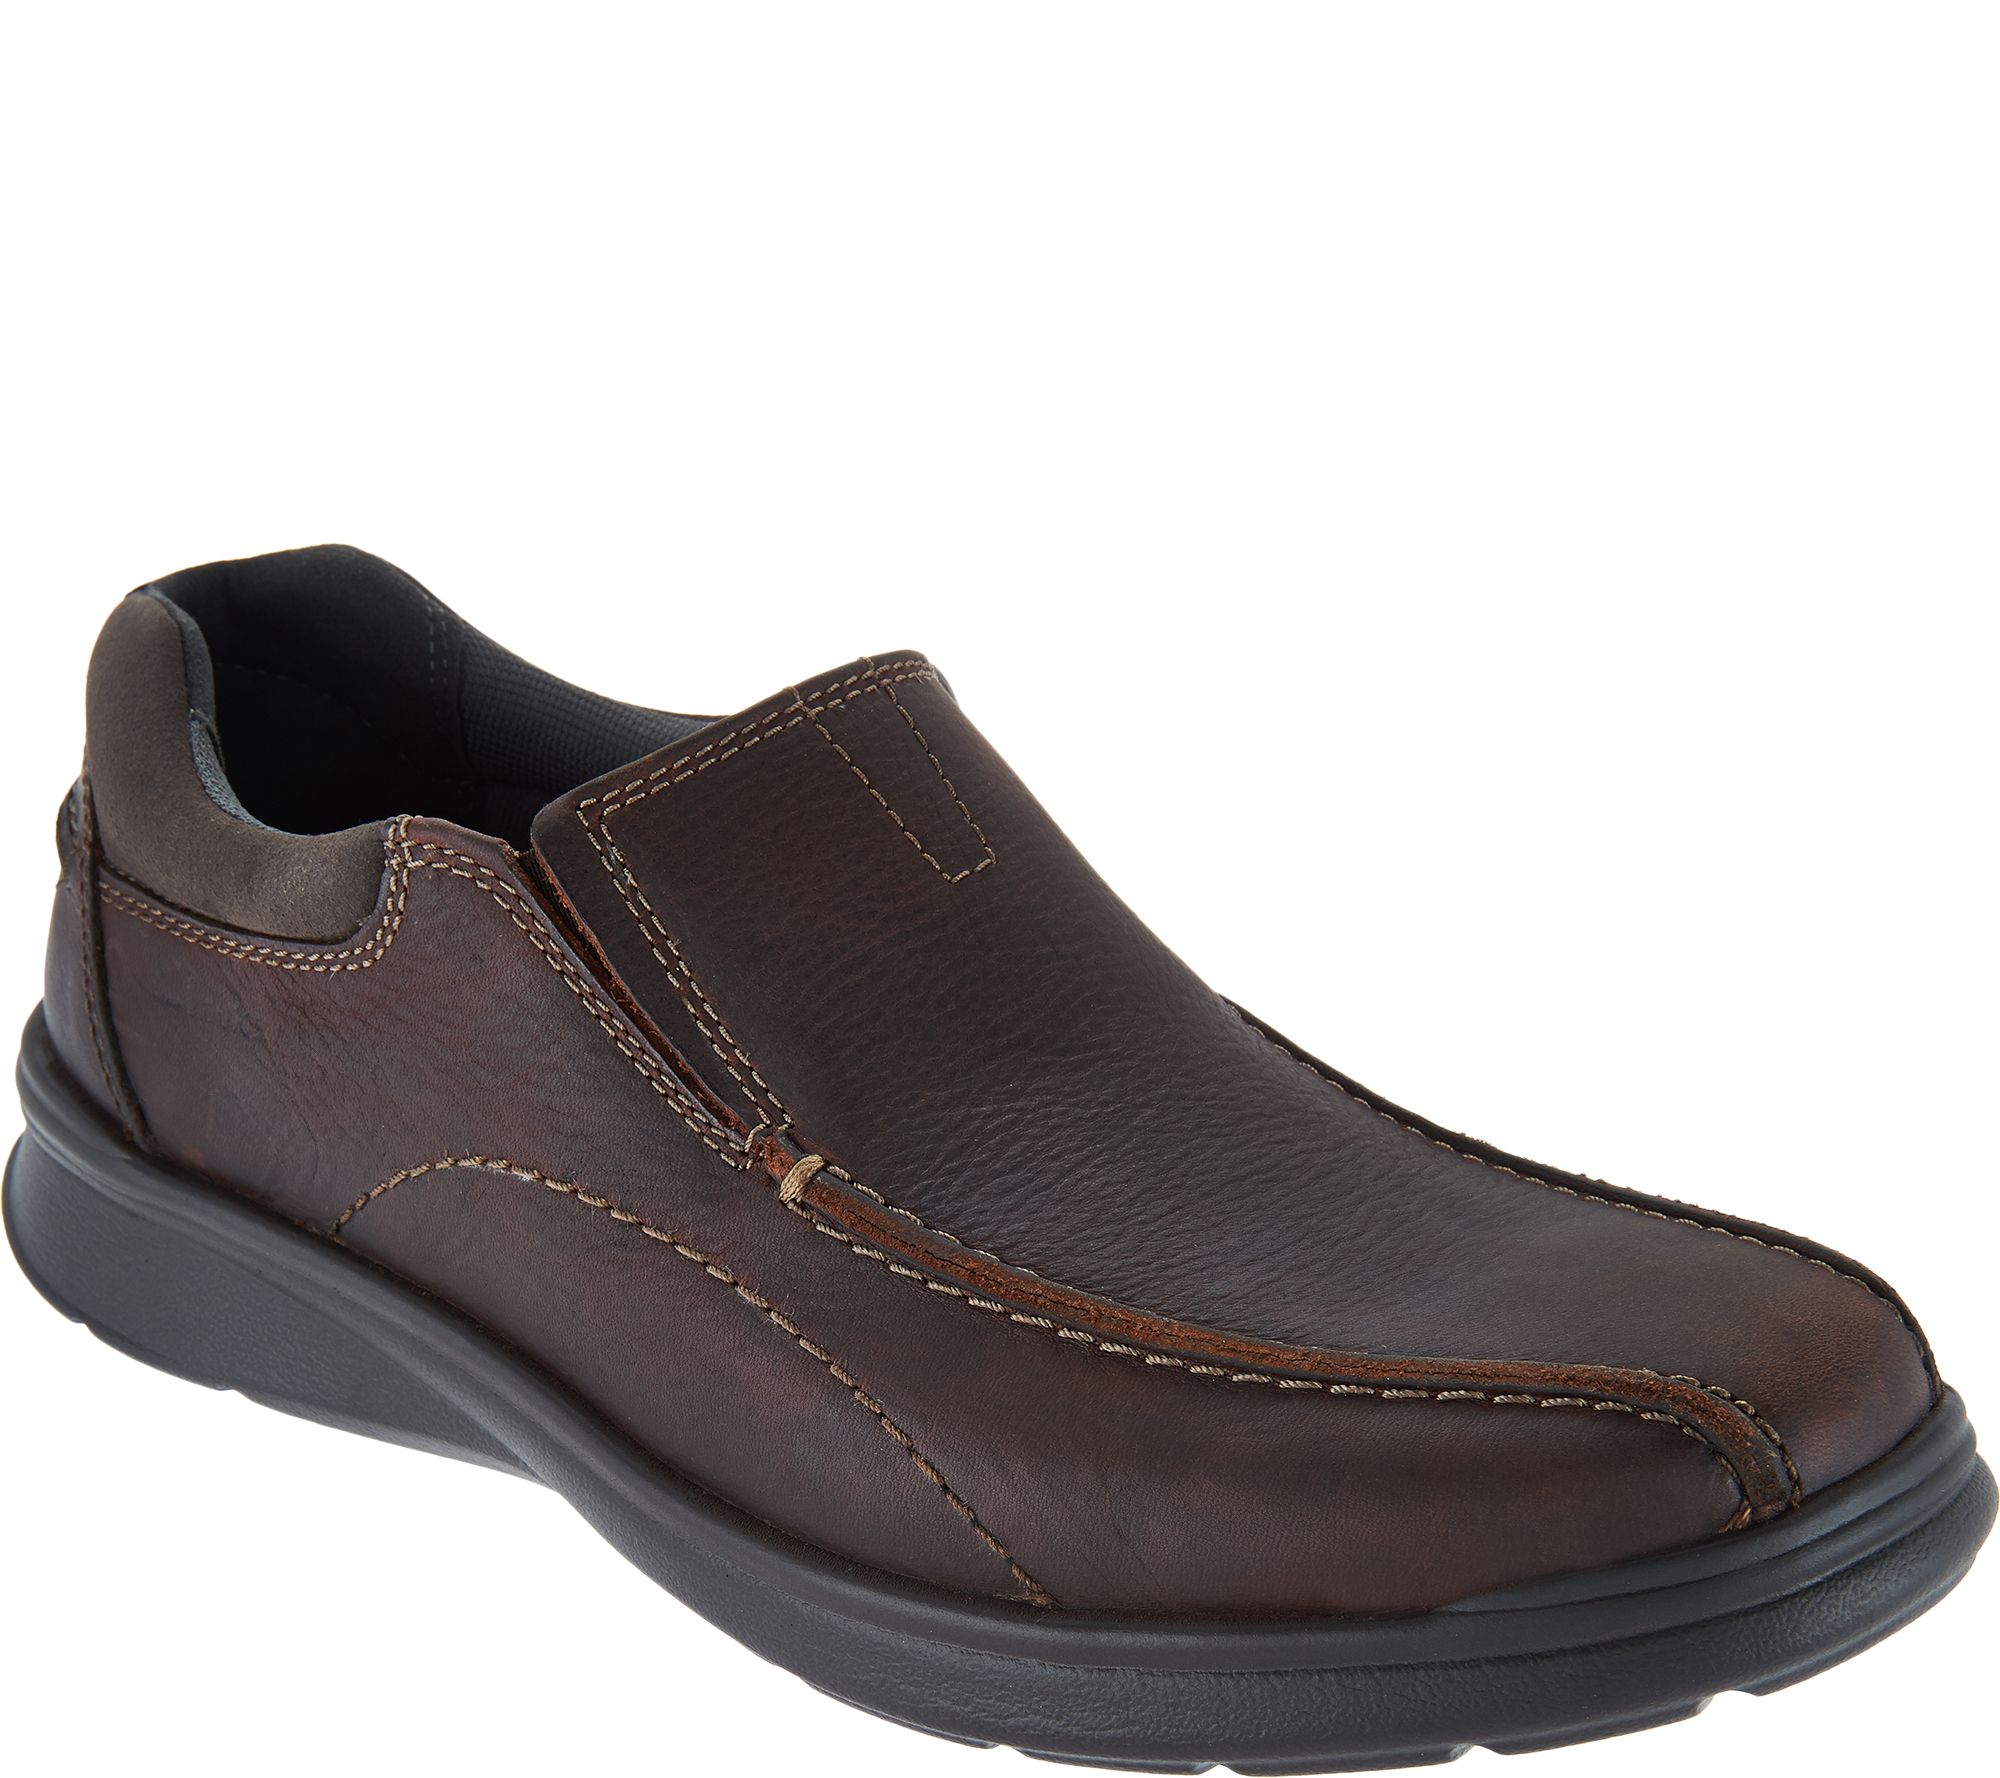 Clarks Men's Leather Slip-on Shoes - Cotrell Step - QVC.com